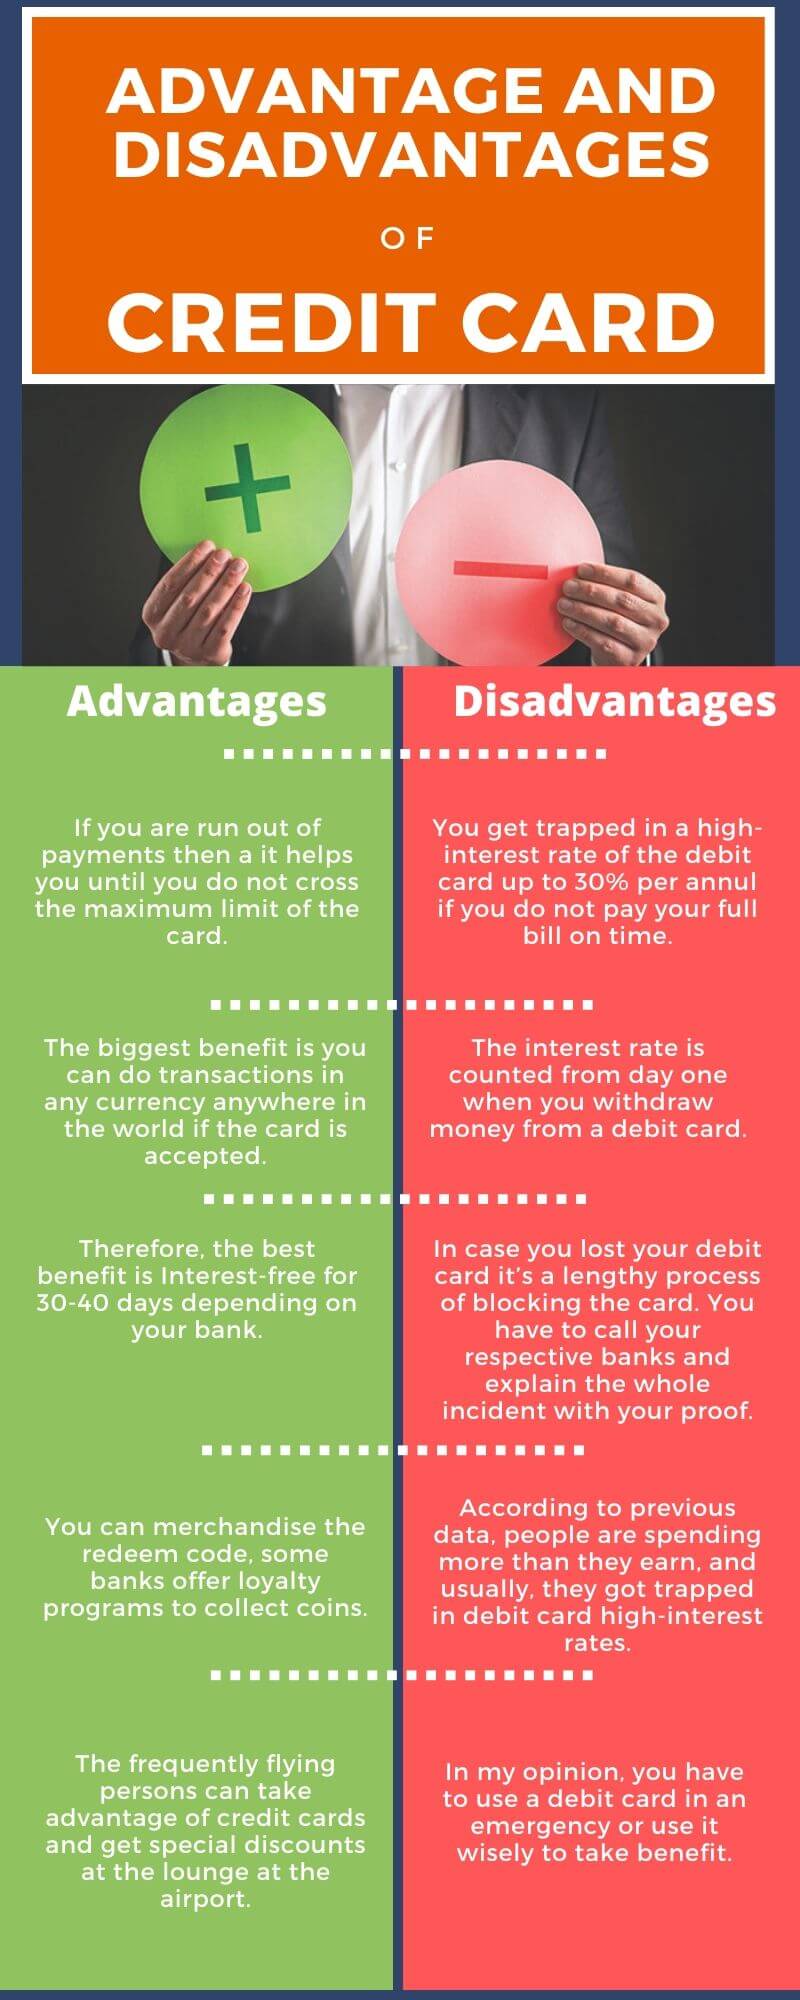 Advantage and Disadvantages of credit card